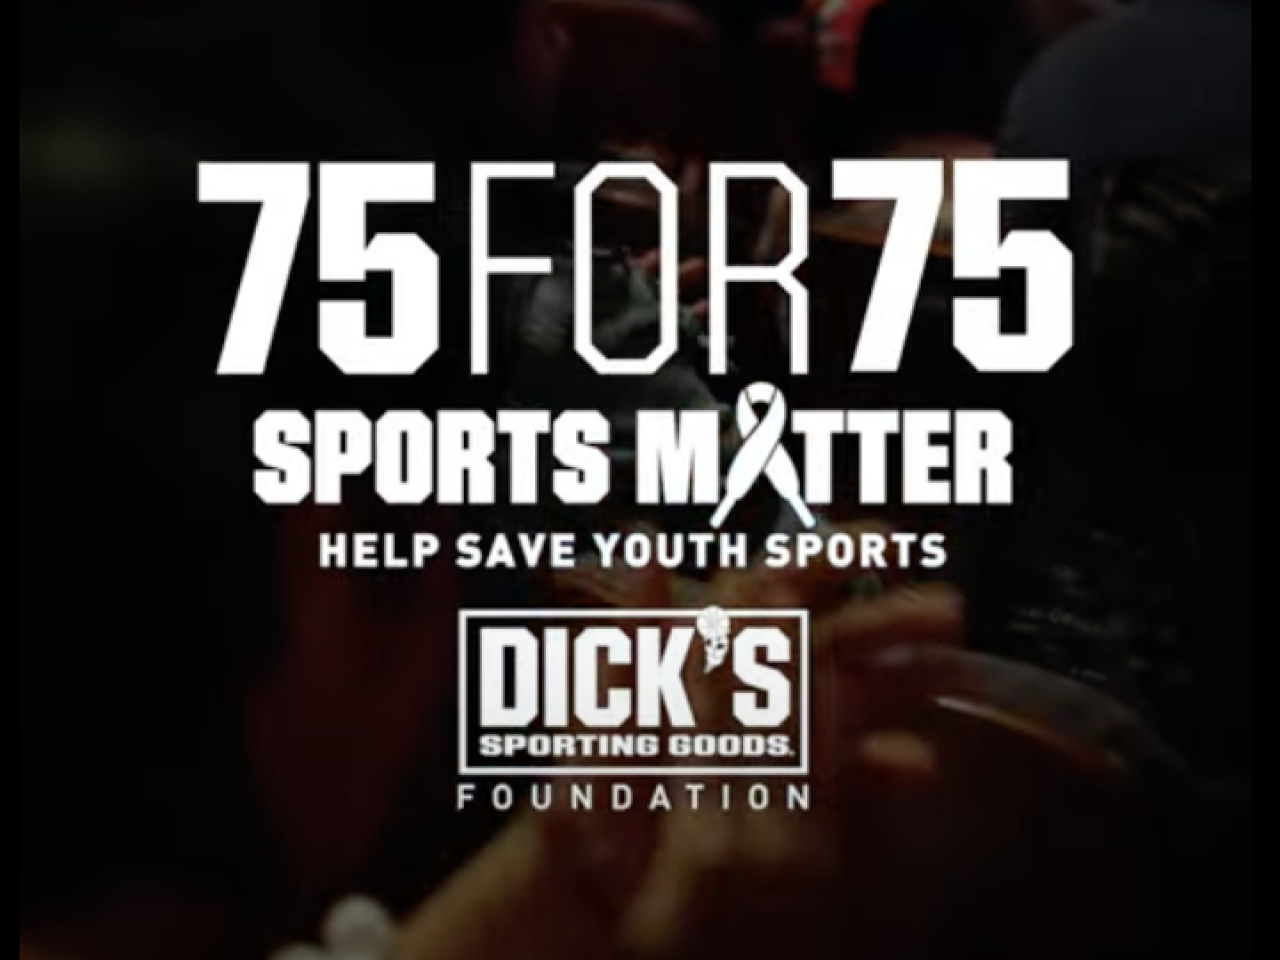 75FOR75 Sports Matter.